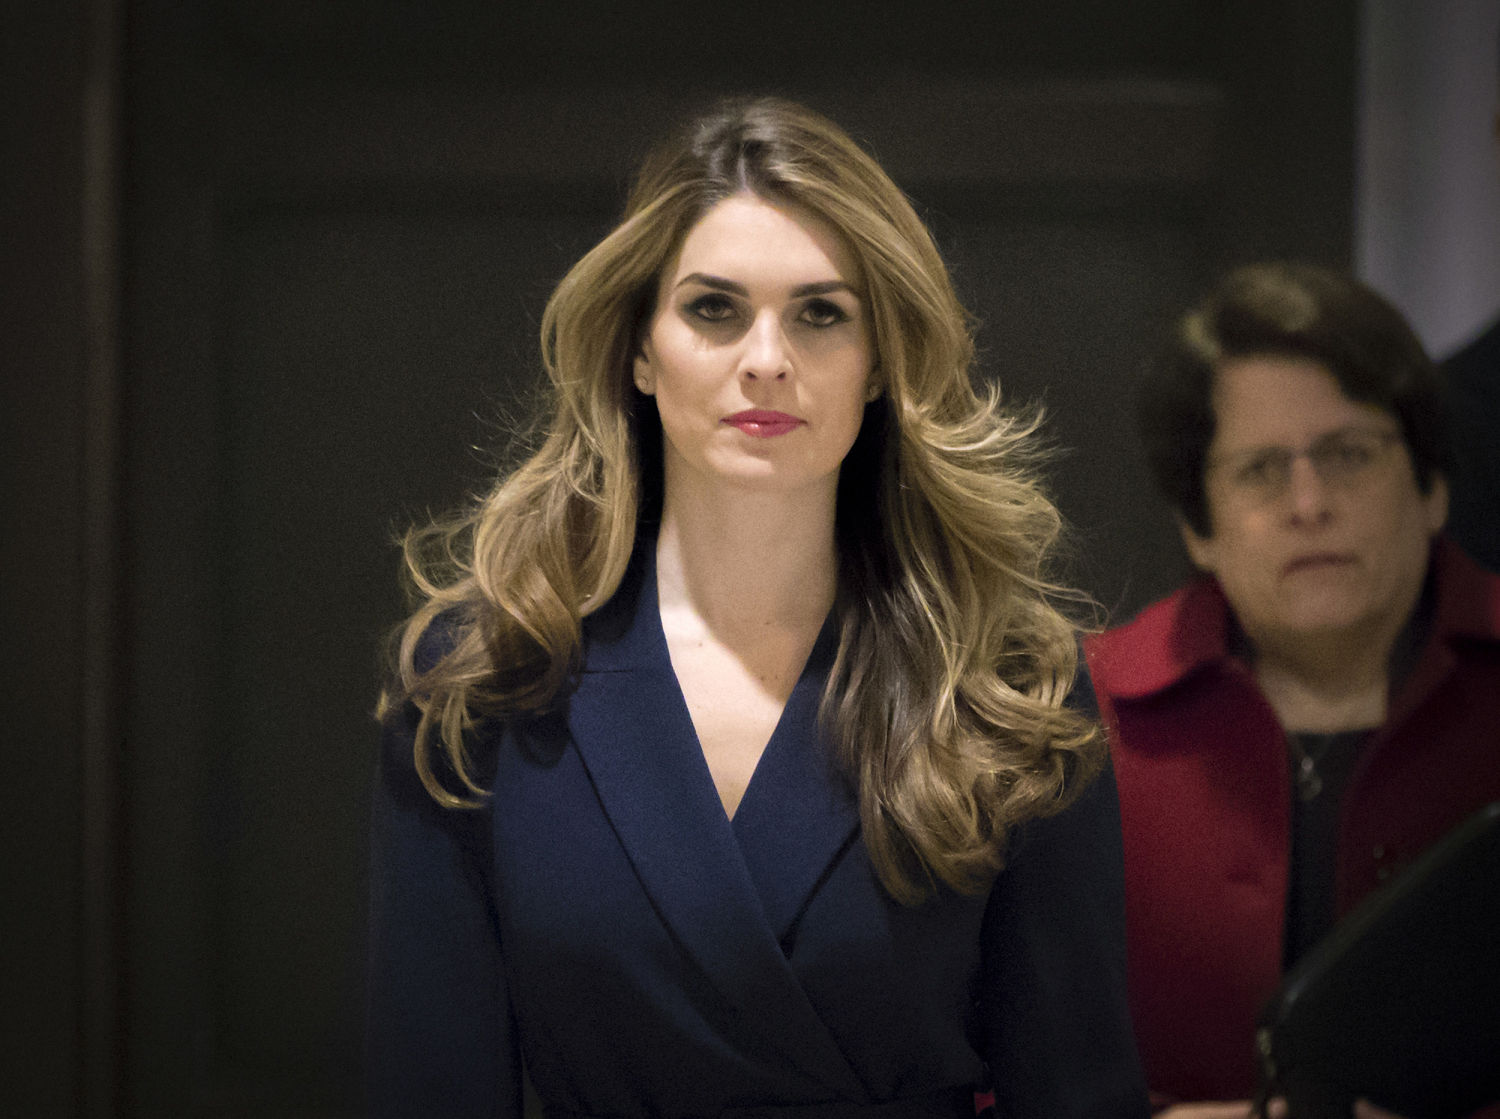 Hope Hicks shares dramatic account of Trump's reaction to 'Access Hollywood' tape